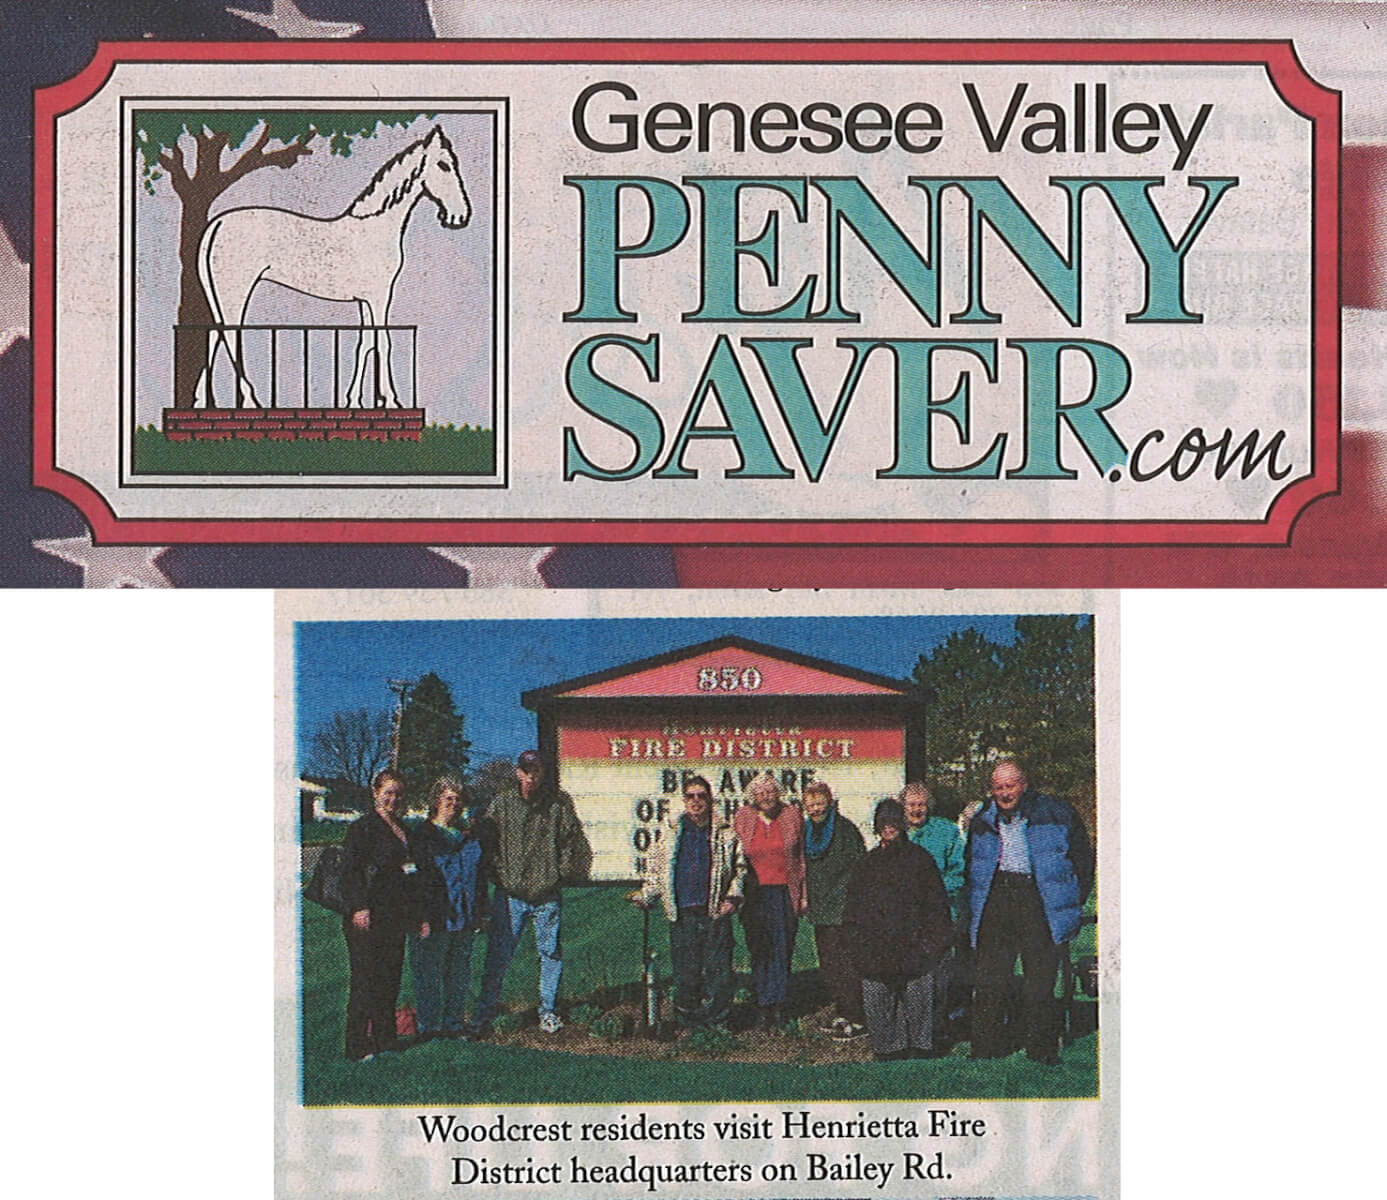 Woodcrest Commons visits Henrietta Fire District, Photo in the Genesee Valley Penny Saver July 3, 2015